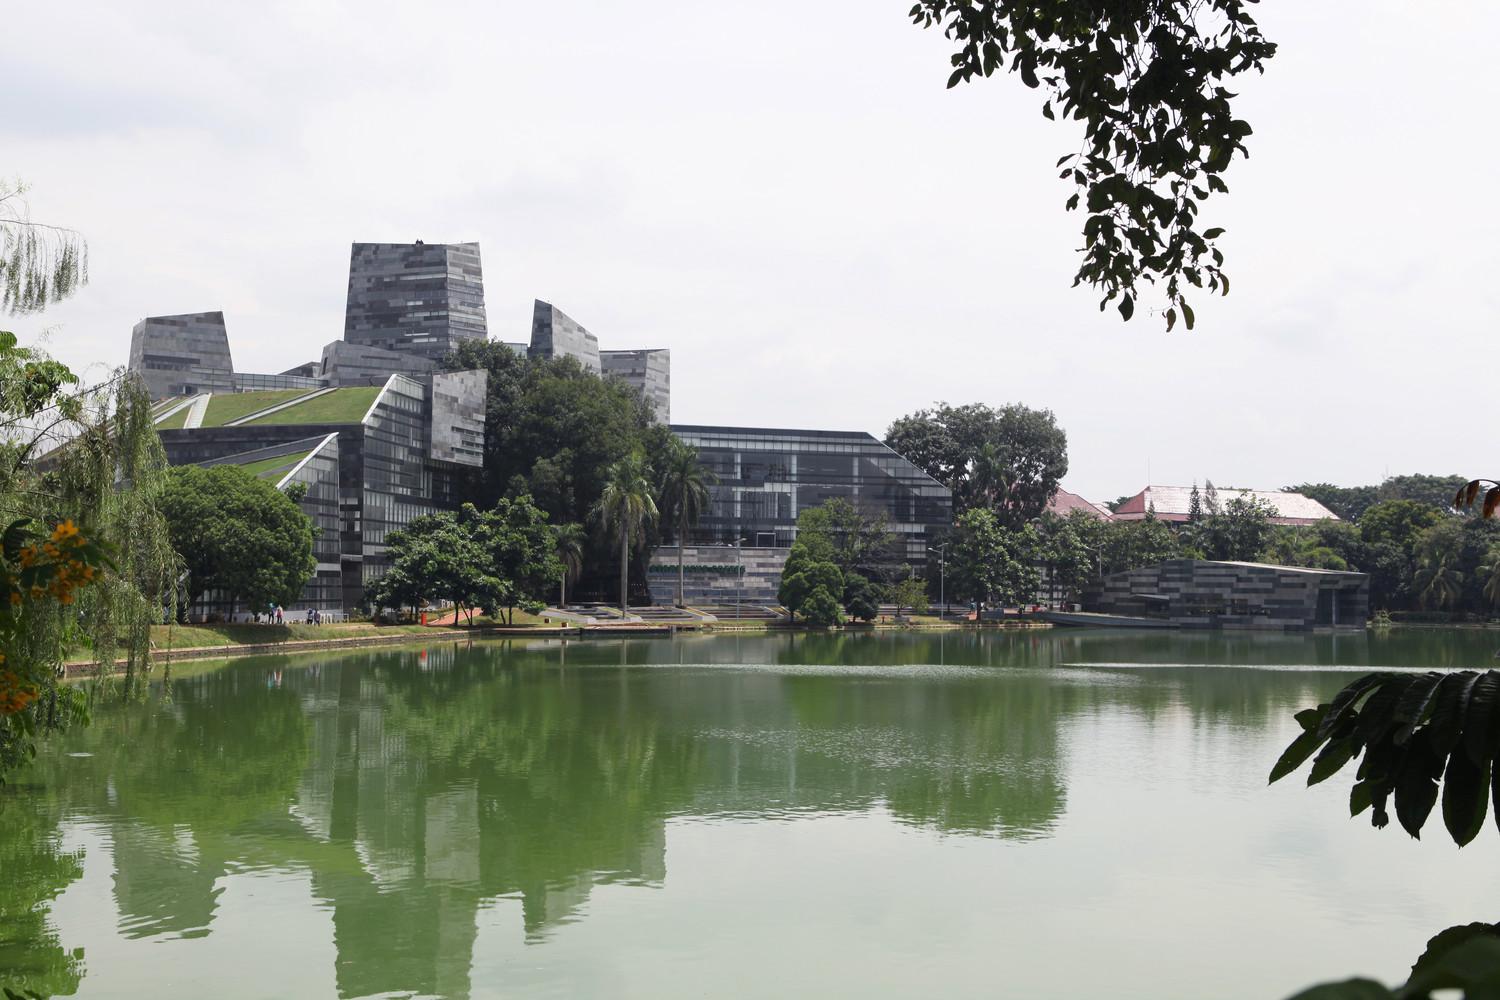 Central Library University - The circular grass - covered Earth mound view from main campus street